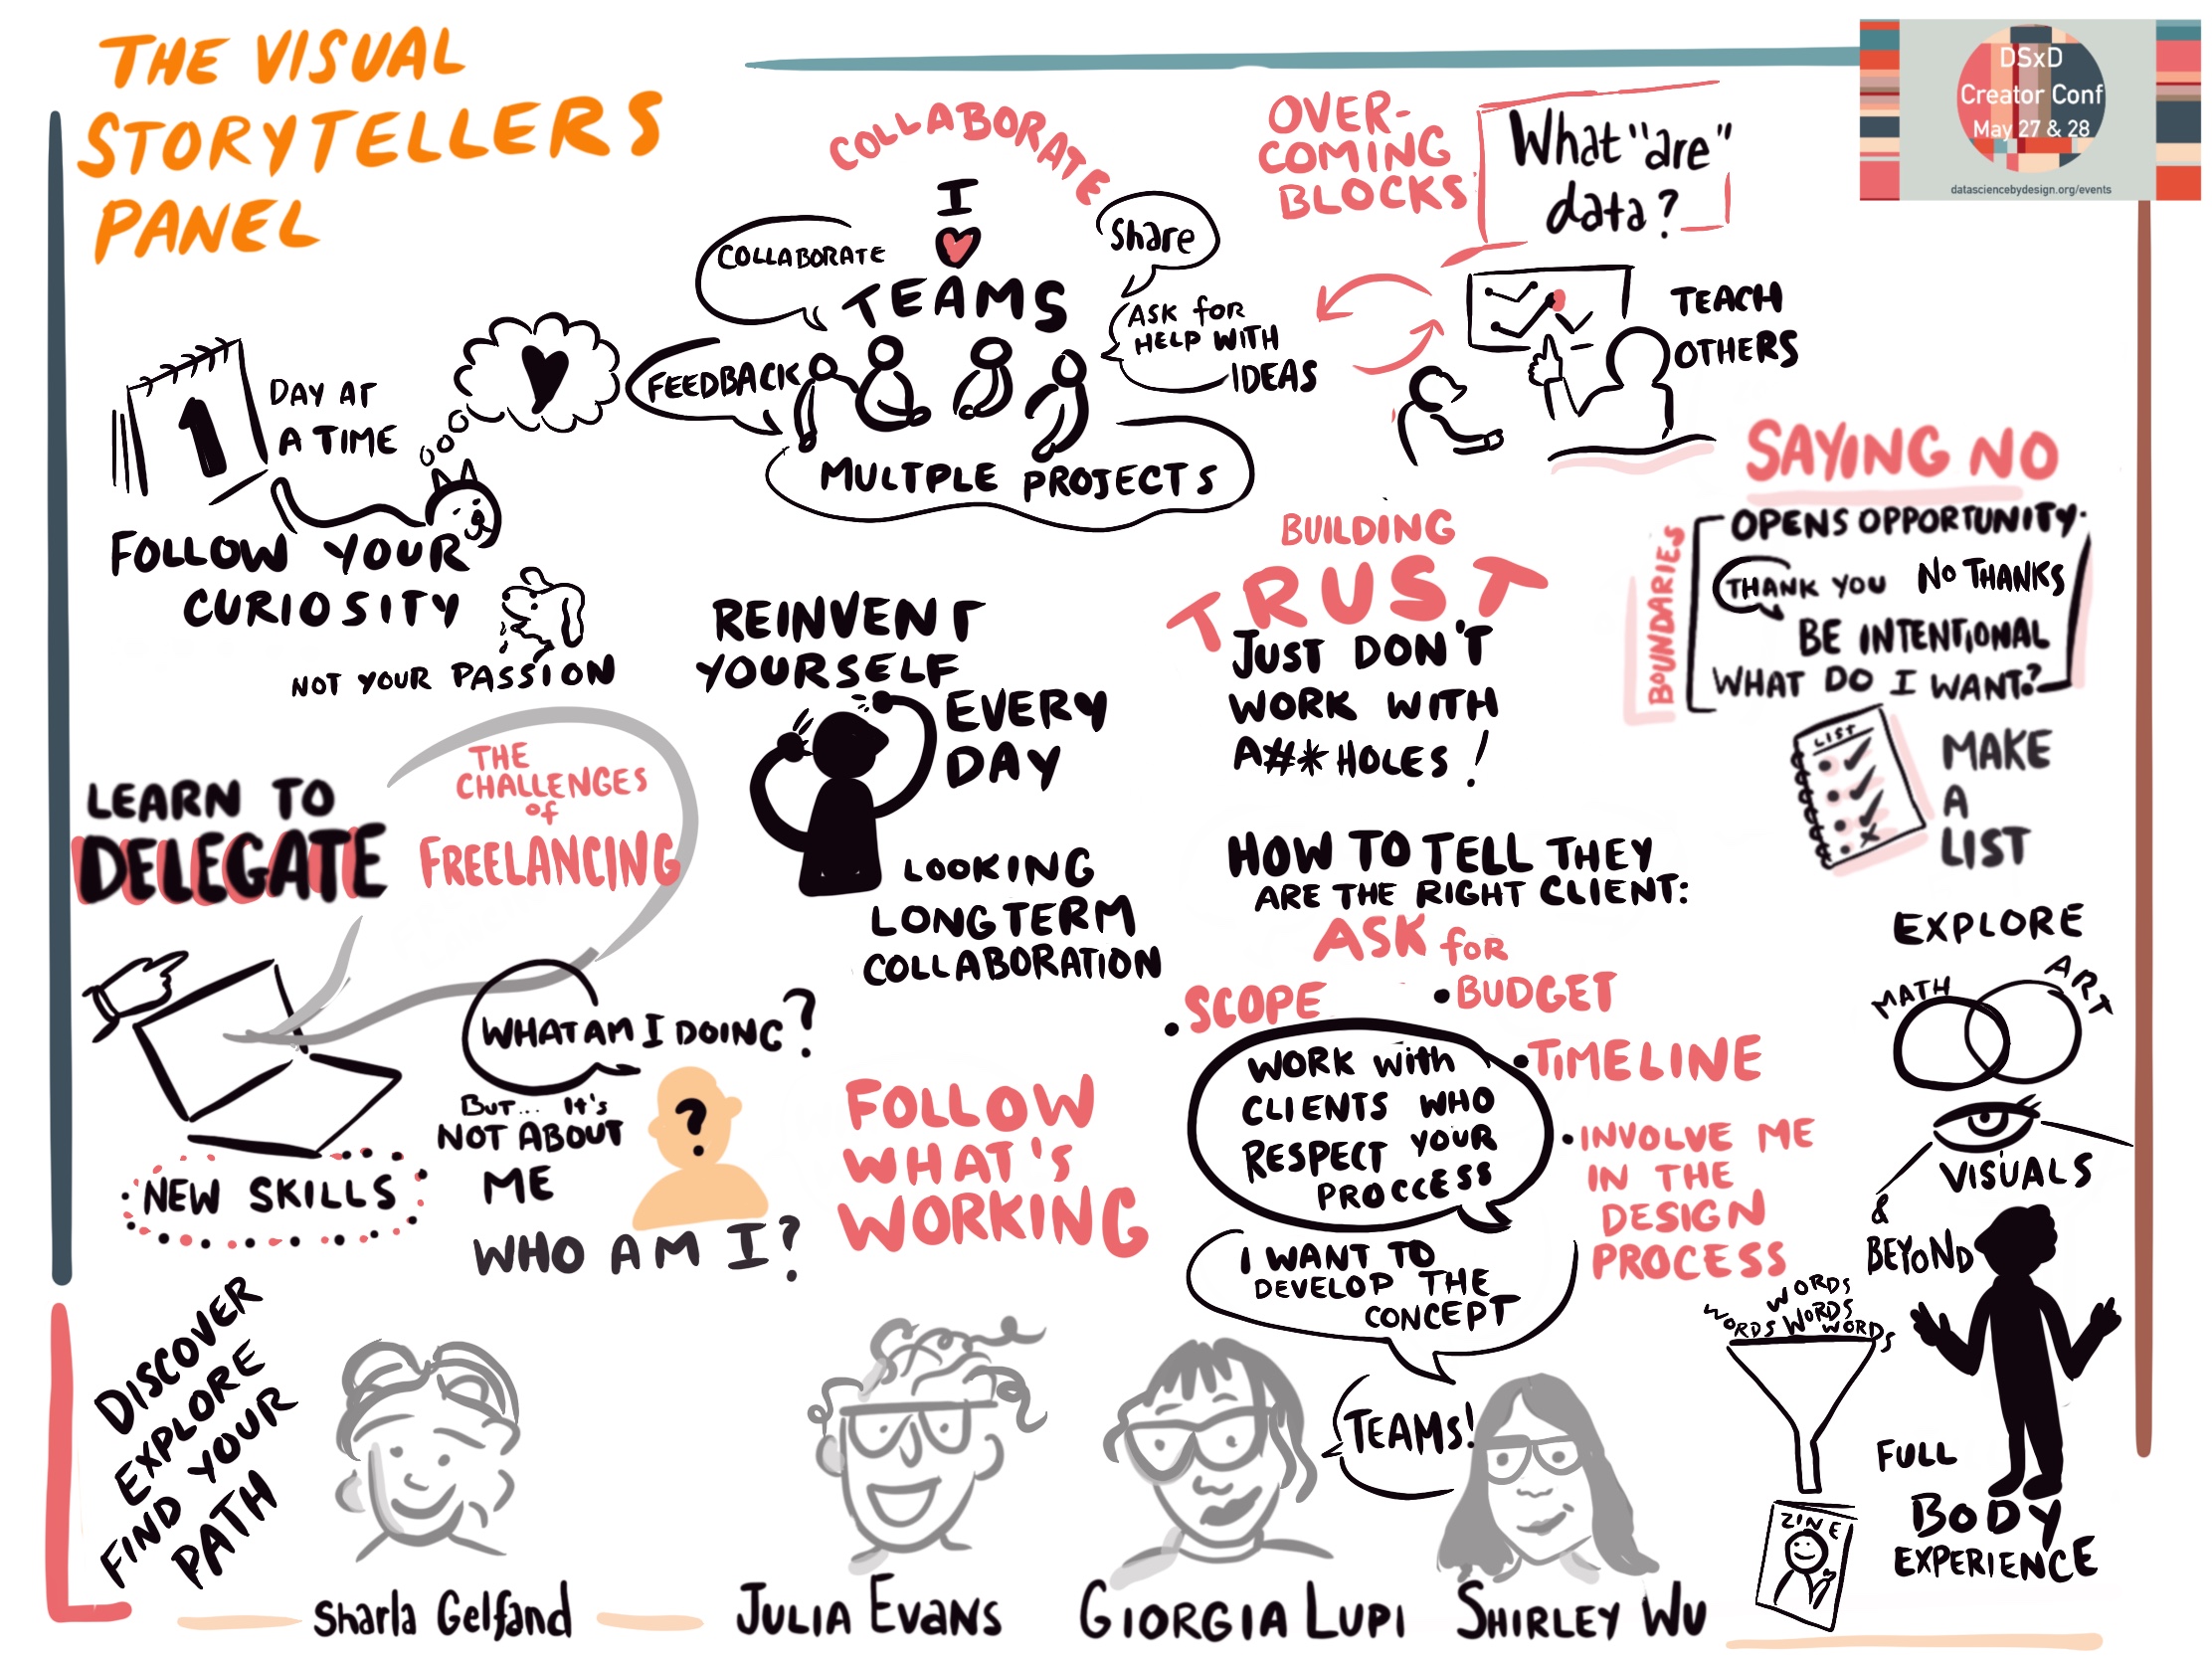 Sketch showing cartoons of speakers and words and sketches describing reinvent yourself, follow your curiosity, gain new skills, teach others, ❤️ working with others (except A**holes)